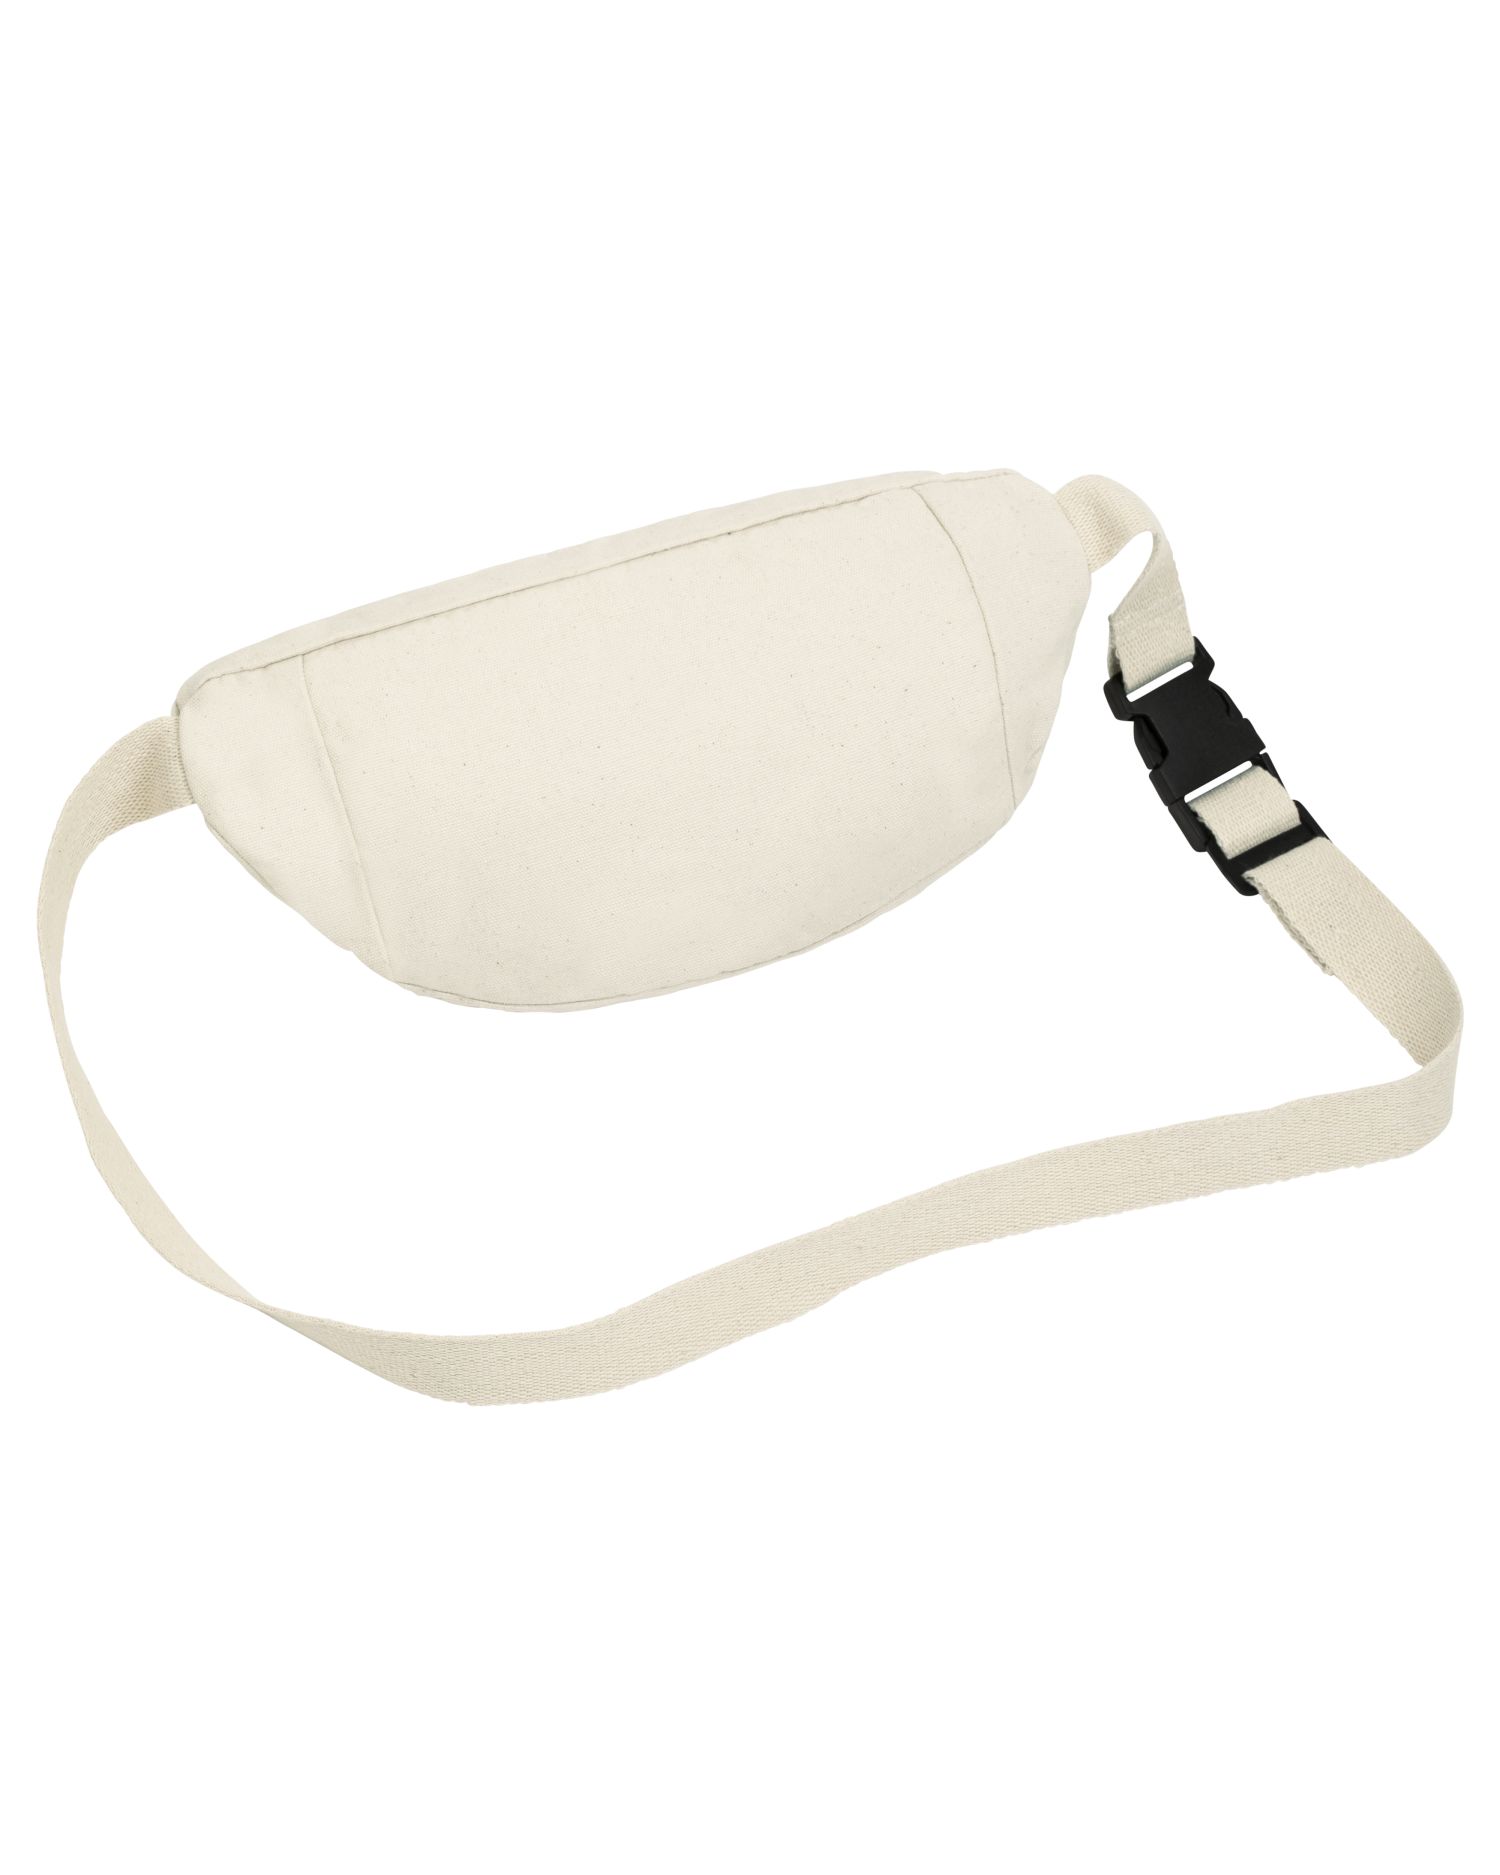 Tasche Hip Bag in Farbe Natural